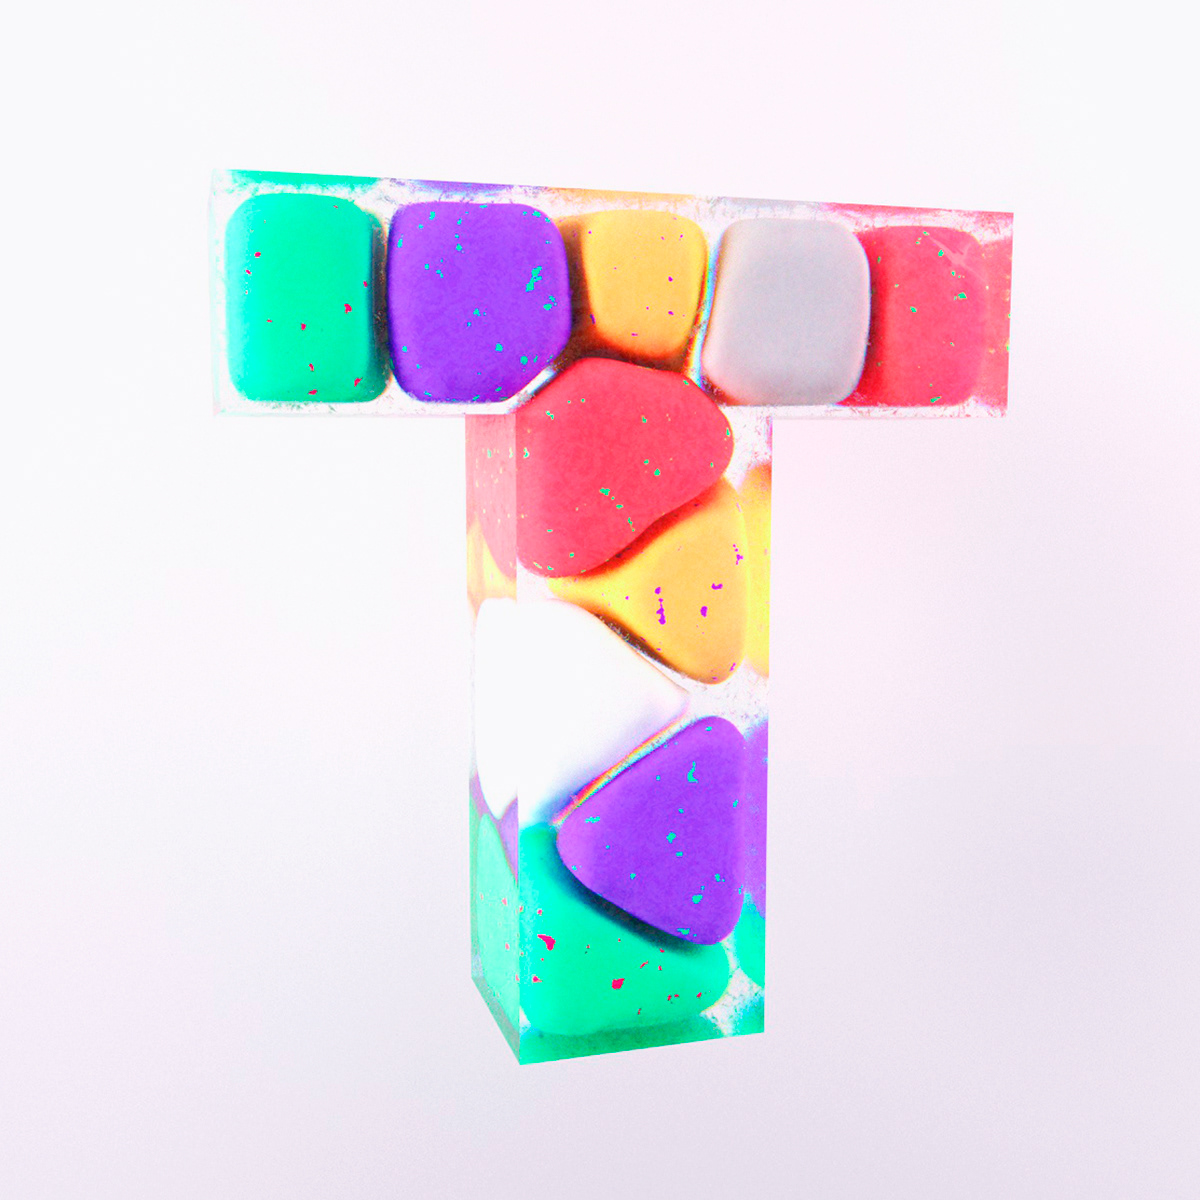 36daysoftype 36daysoftype2021 3D 3dmodeling 3drender alphabet letters type type3d typography  